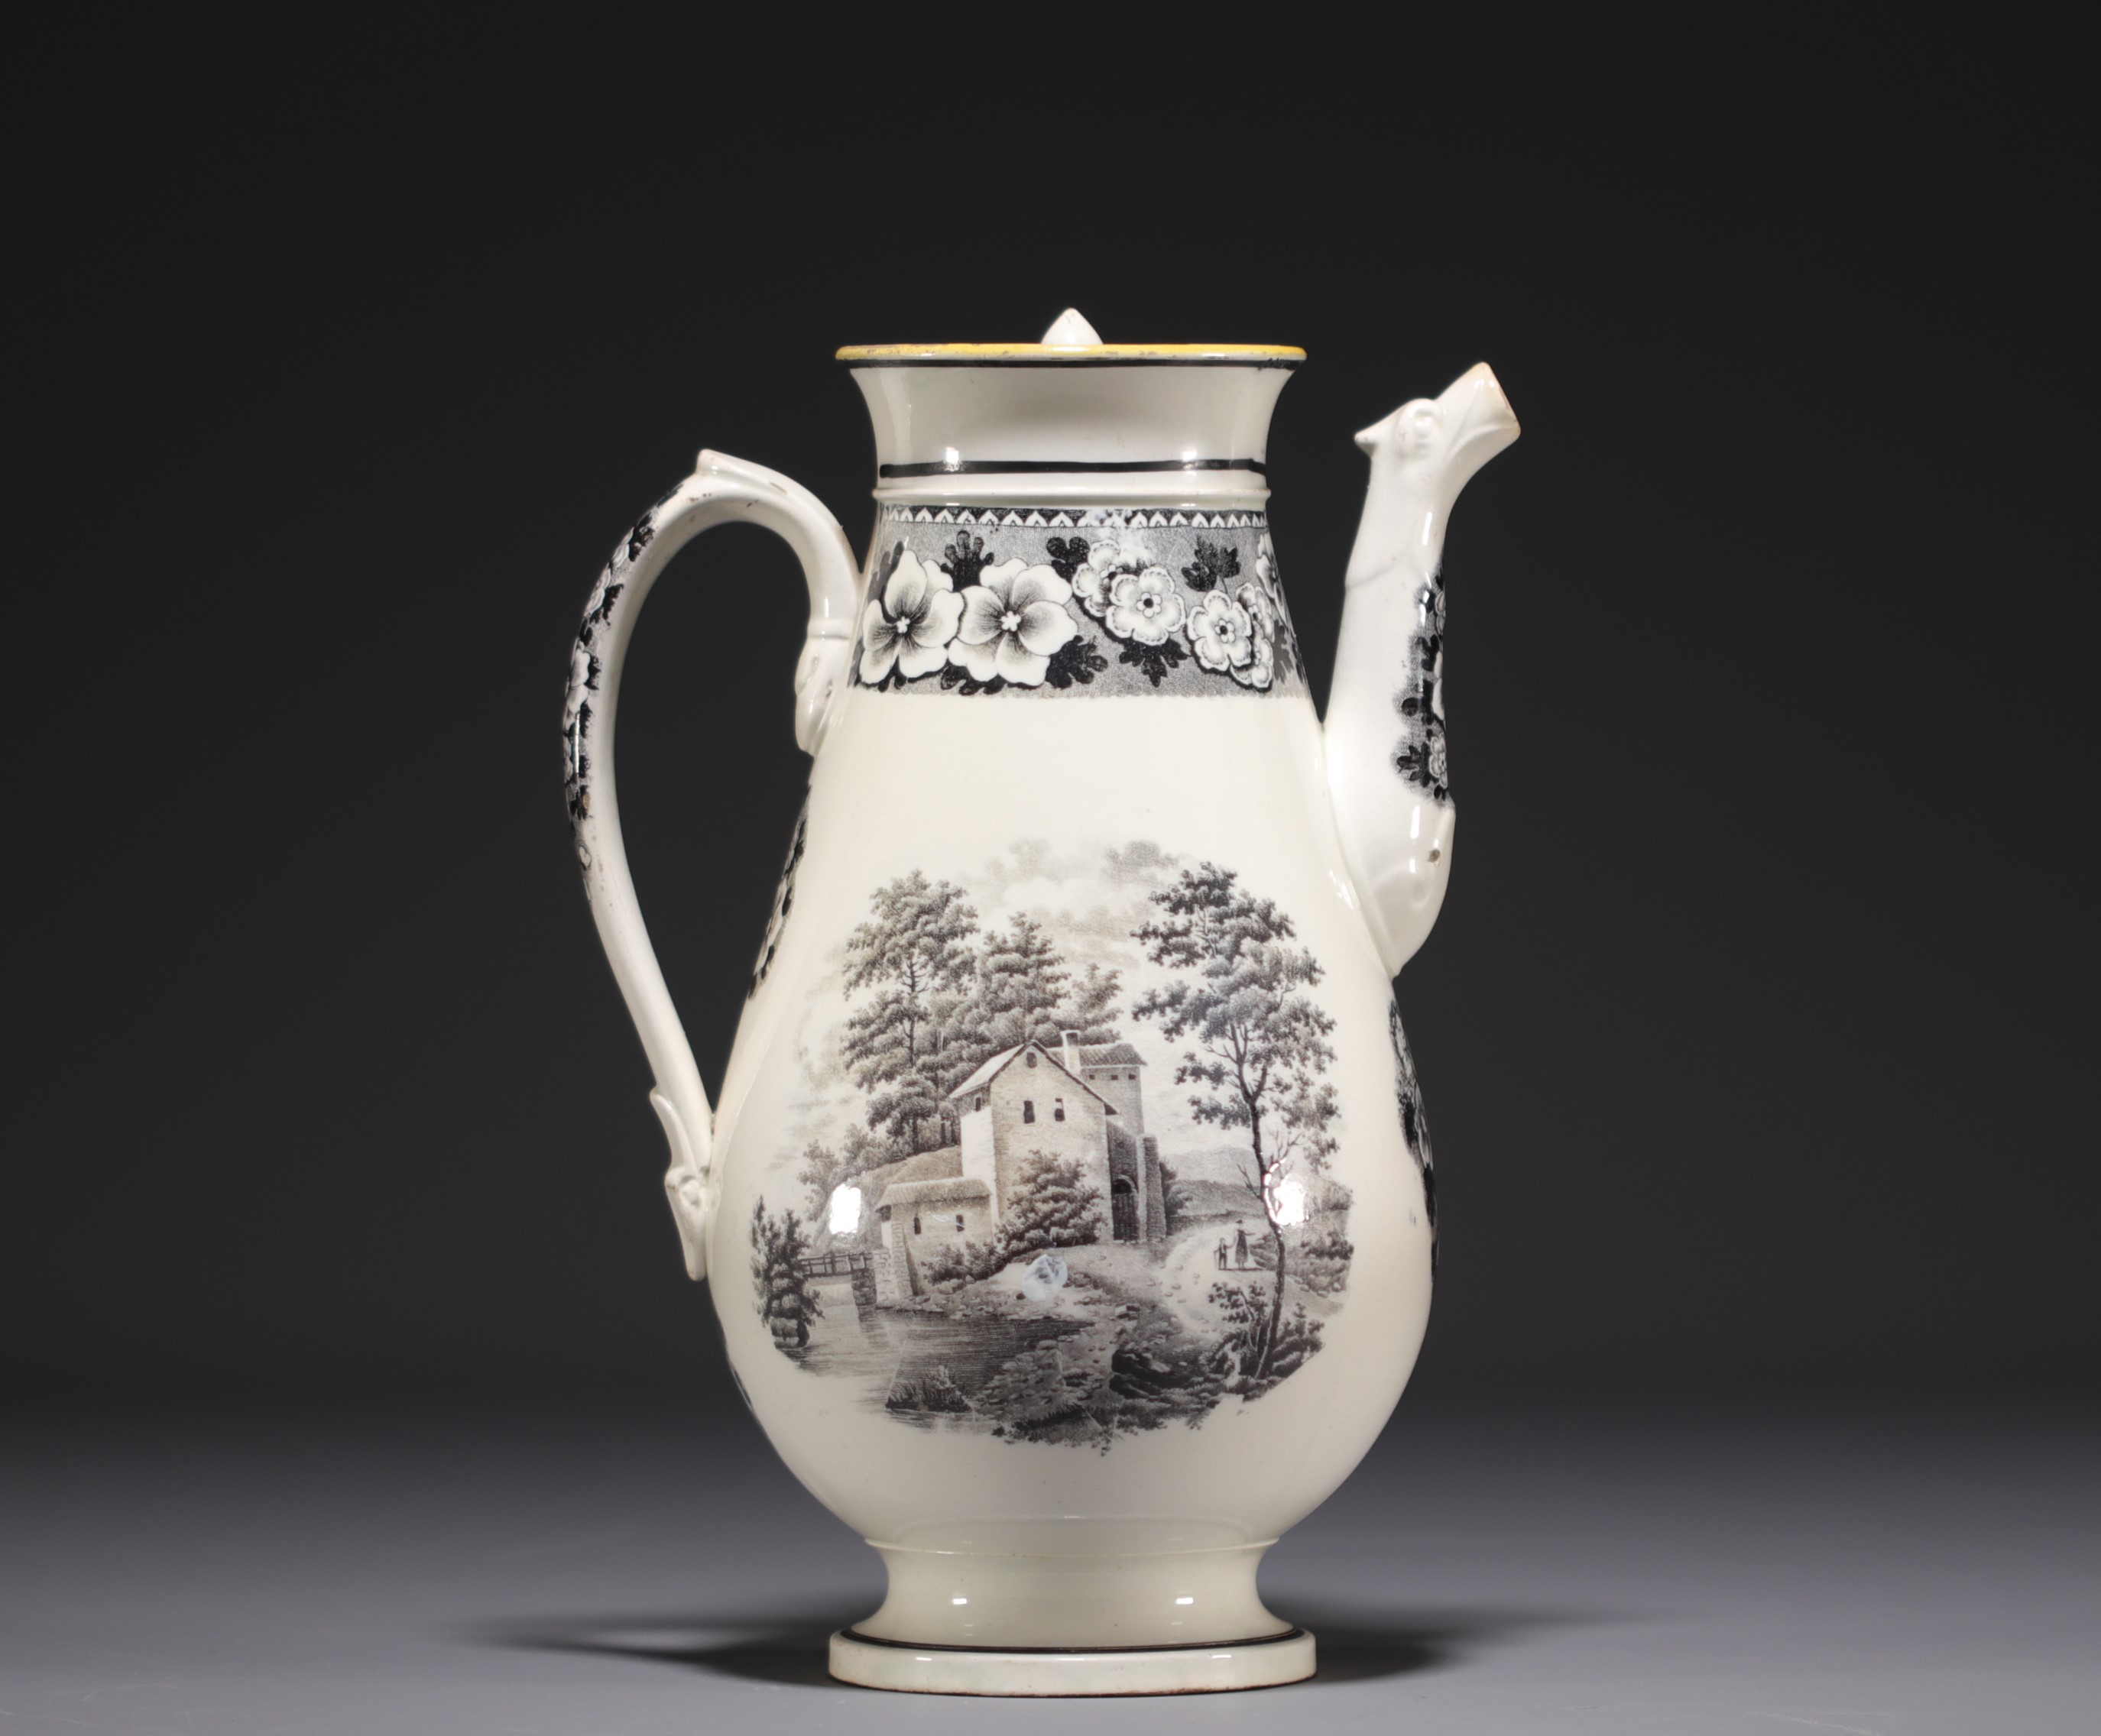 Villeroy & Boch - Earthenware coffee pot with country-style decor and floral entablature, 19th centu - Image 3 of 4